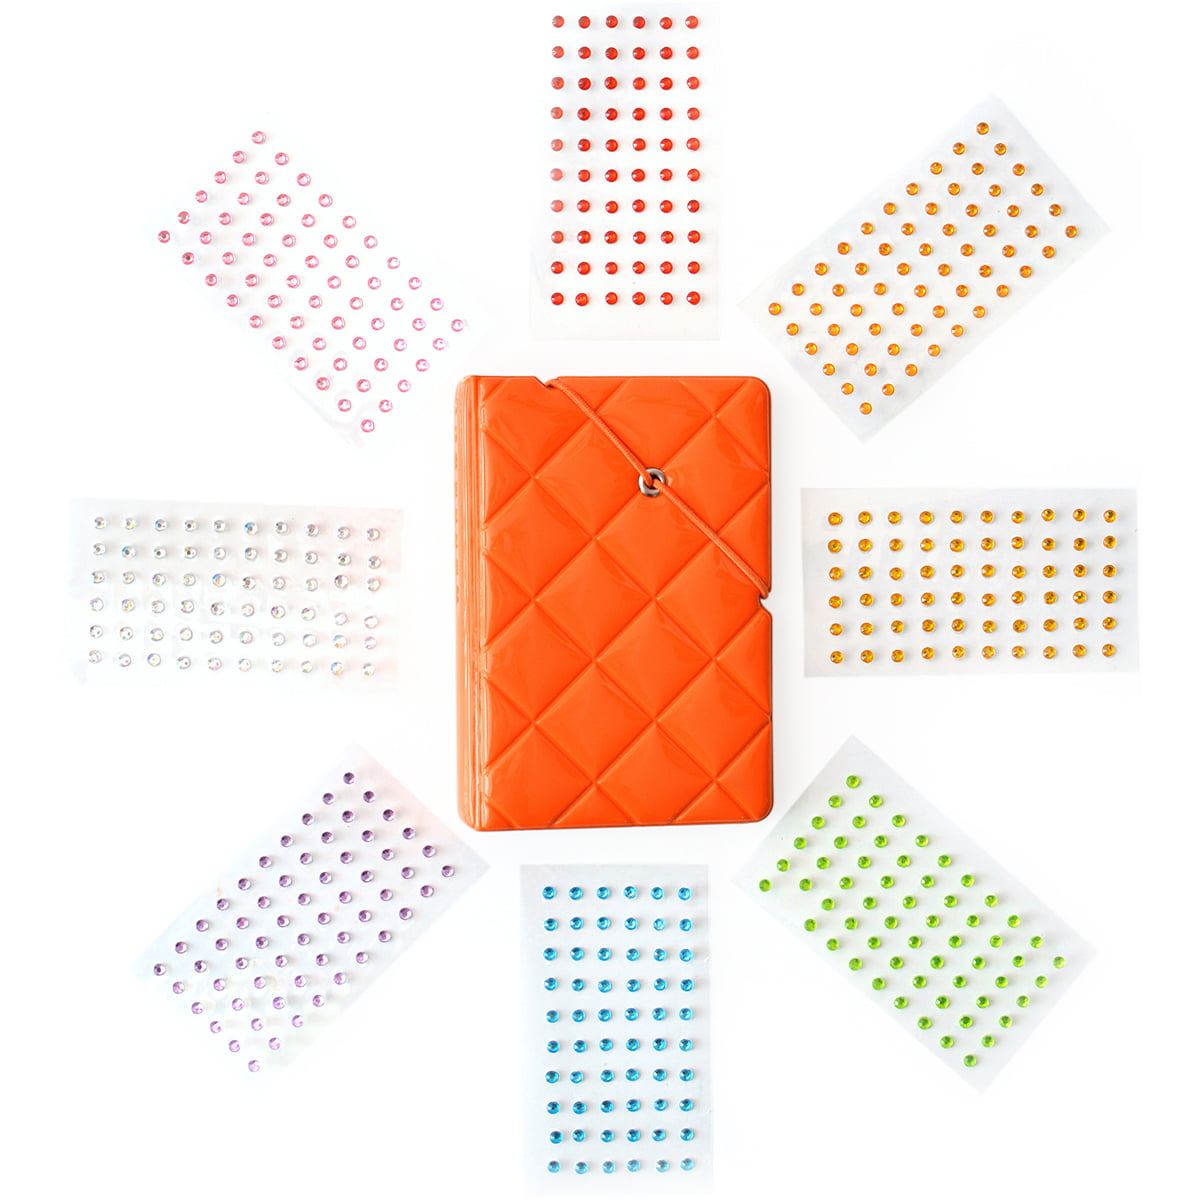 Details about   Queen & Co Bling Book Binder Orange Full 8 Pages Dots Self Adhesive All Colors 